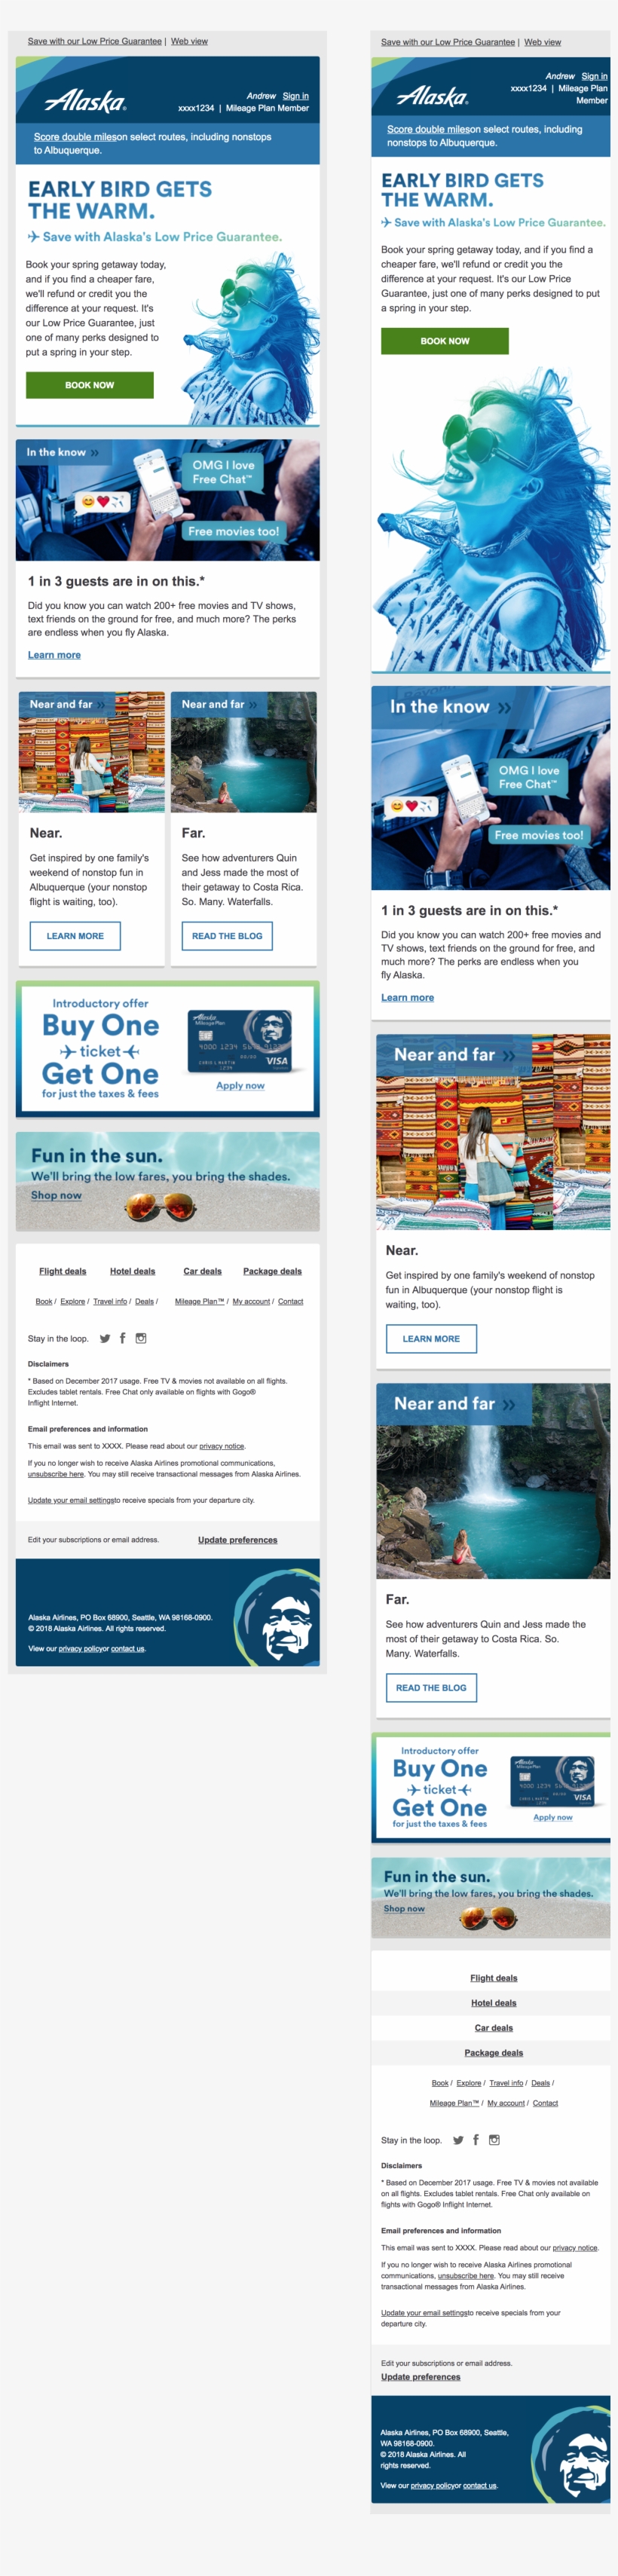 Beautiful Responsive Email From Alaska Airlines - Email, transparent png #840424